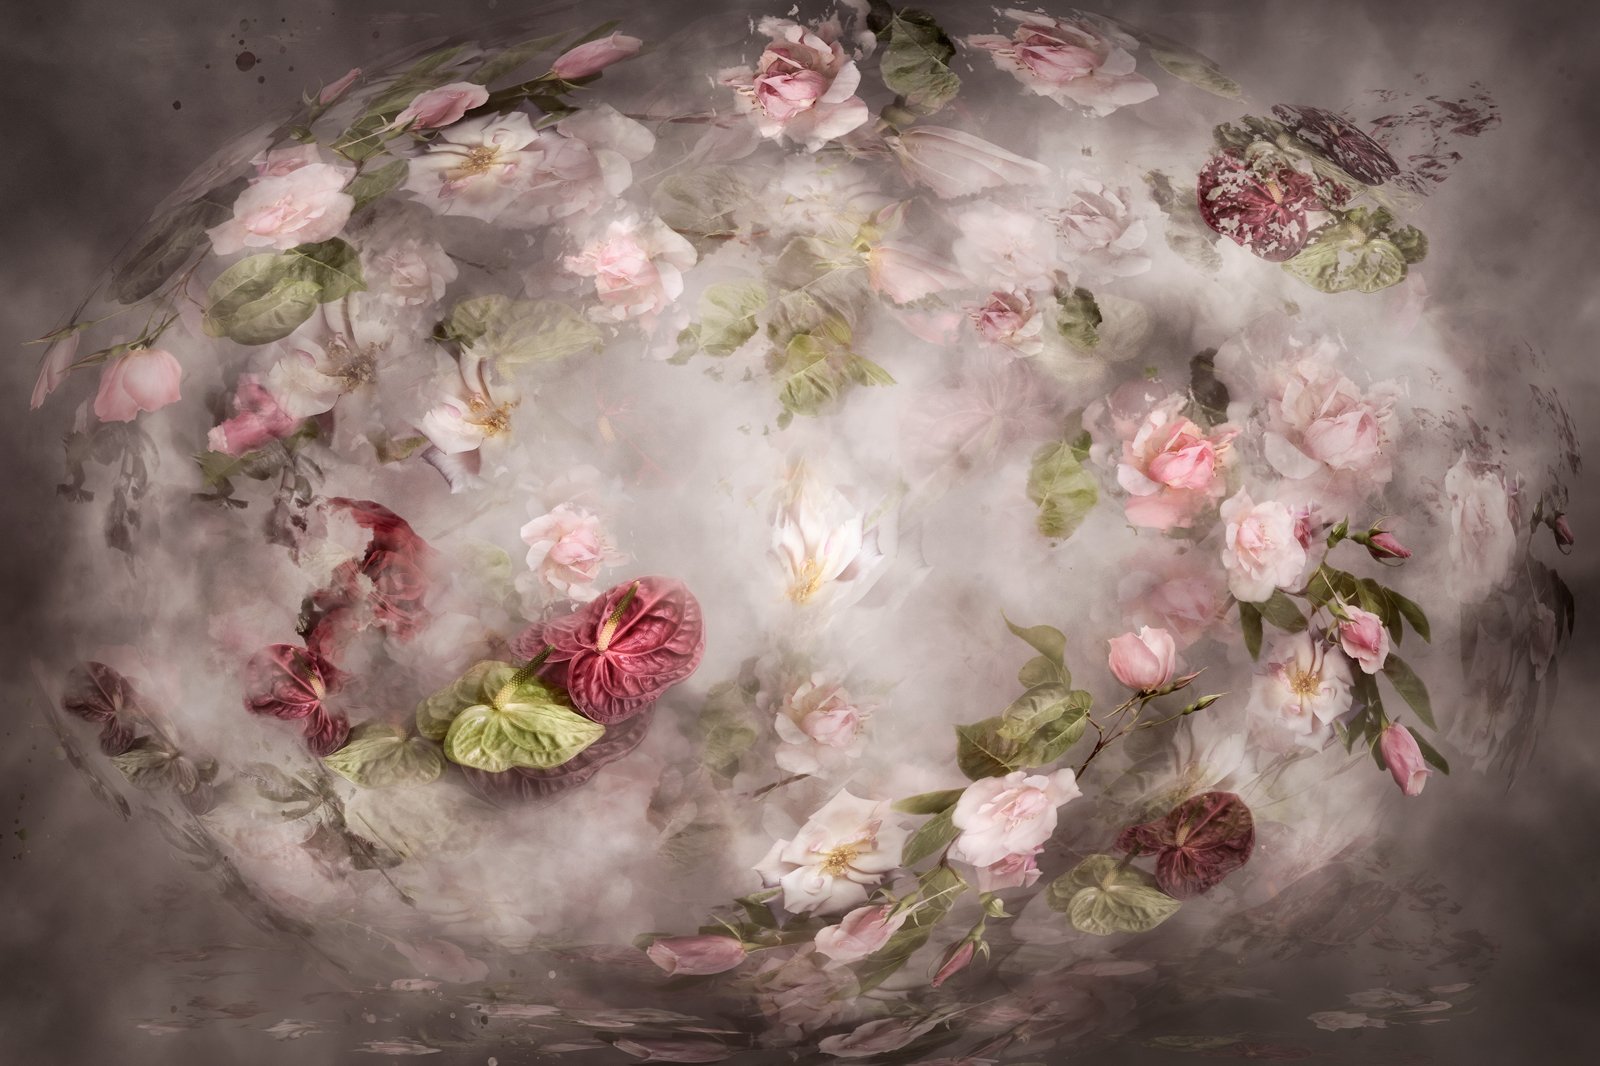 photmanipulation art piece featuring roses and clouds